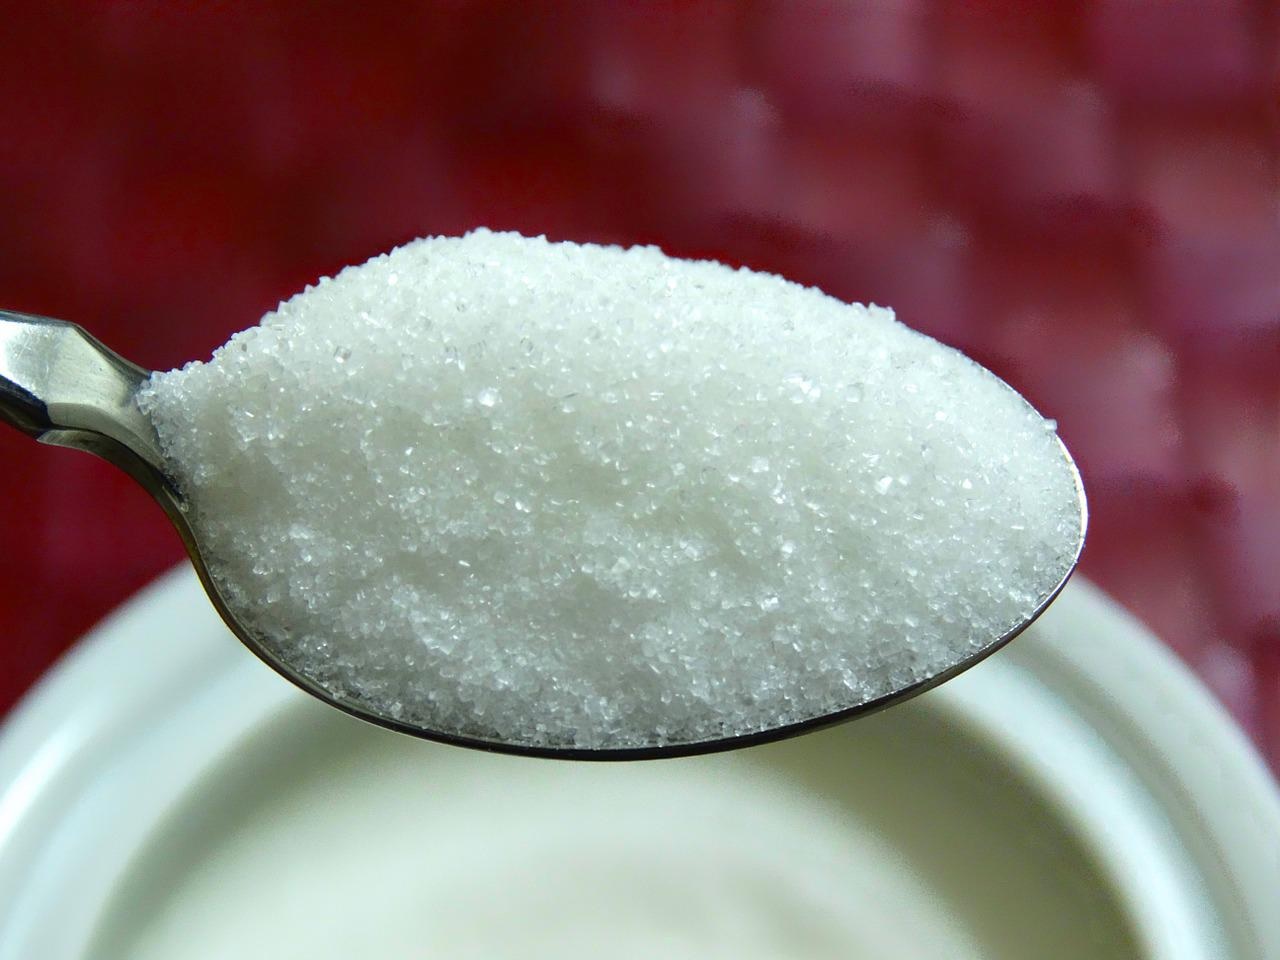 Do you eat sugar This can lead to major damage